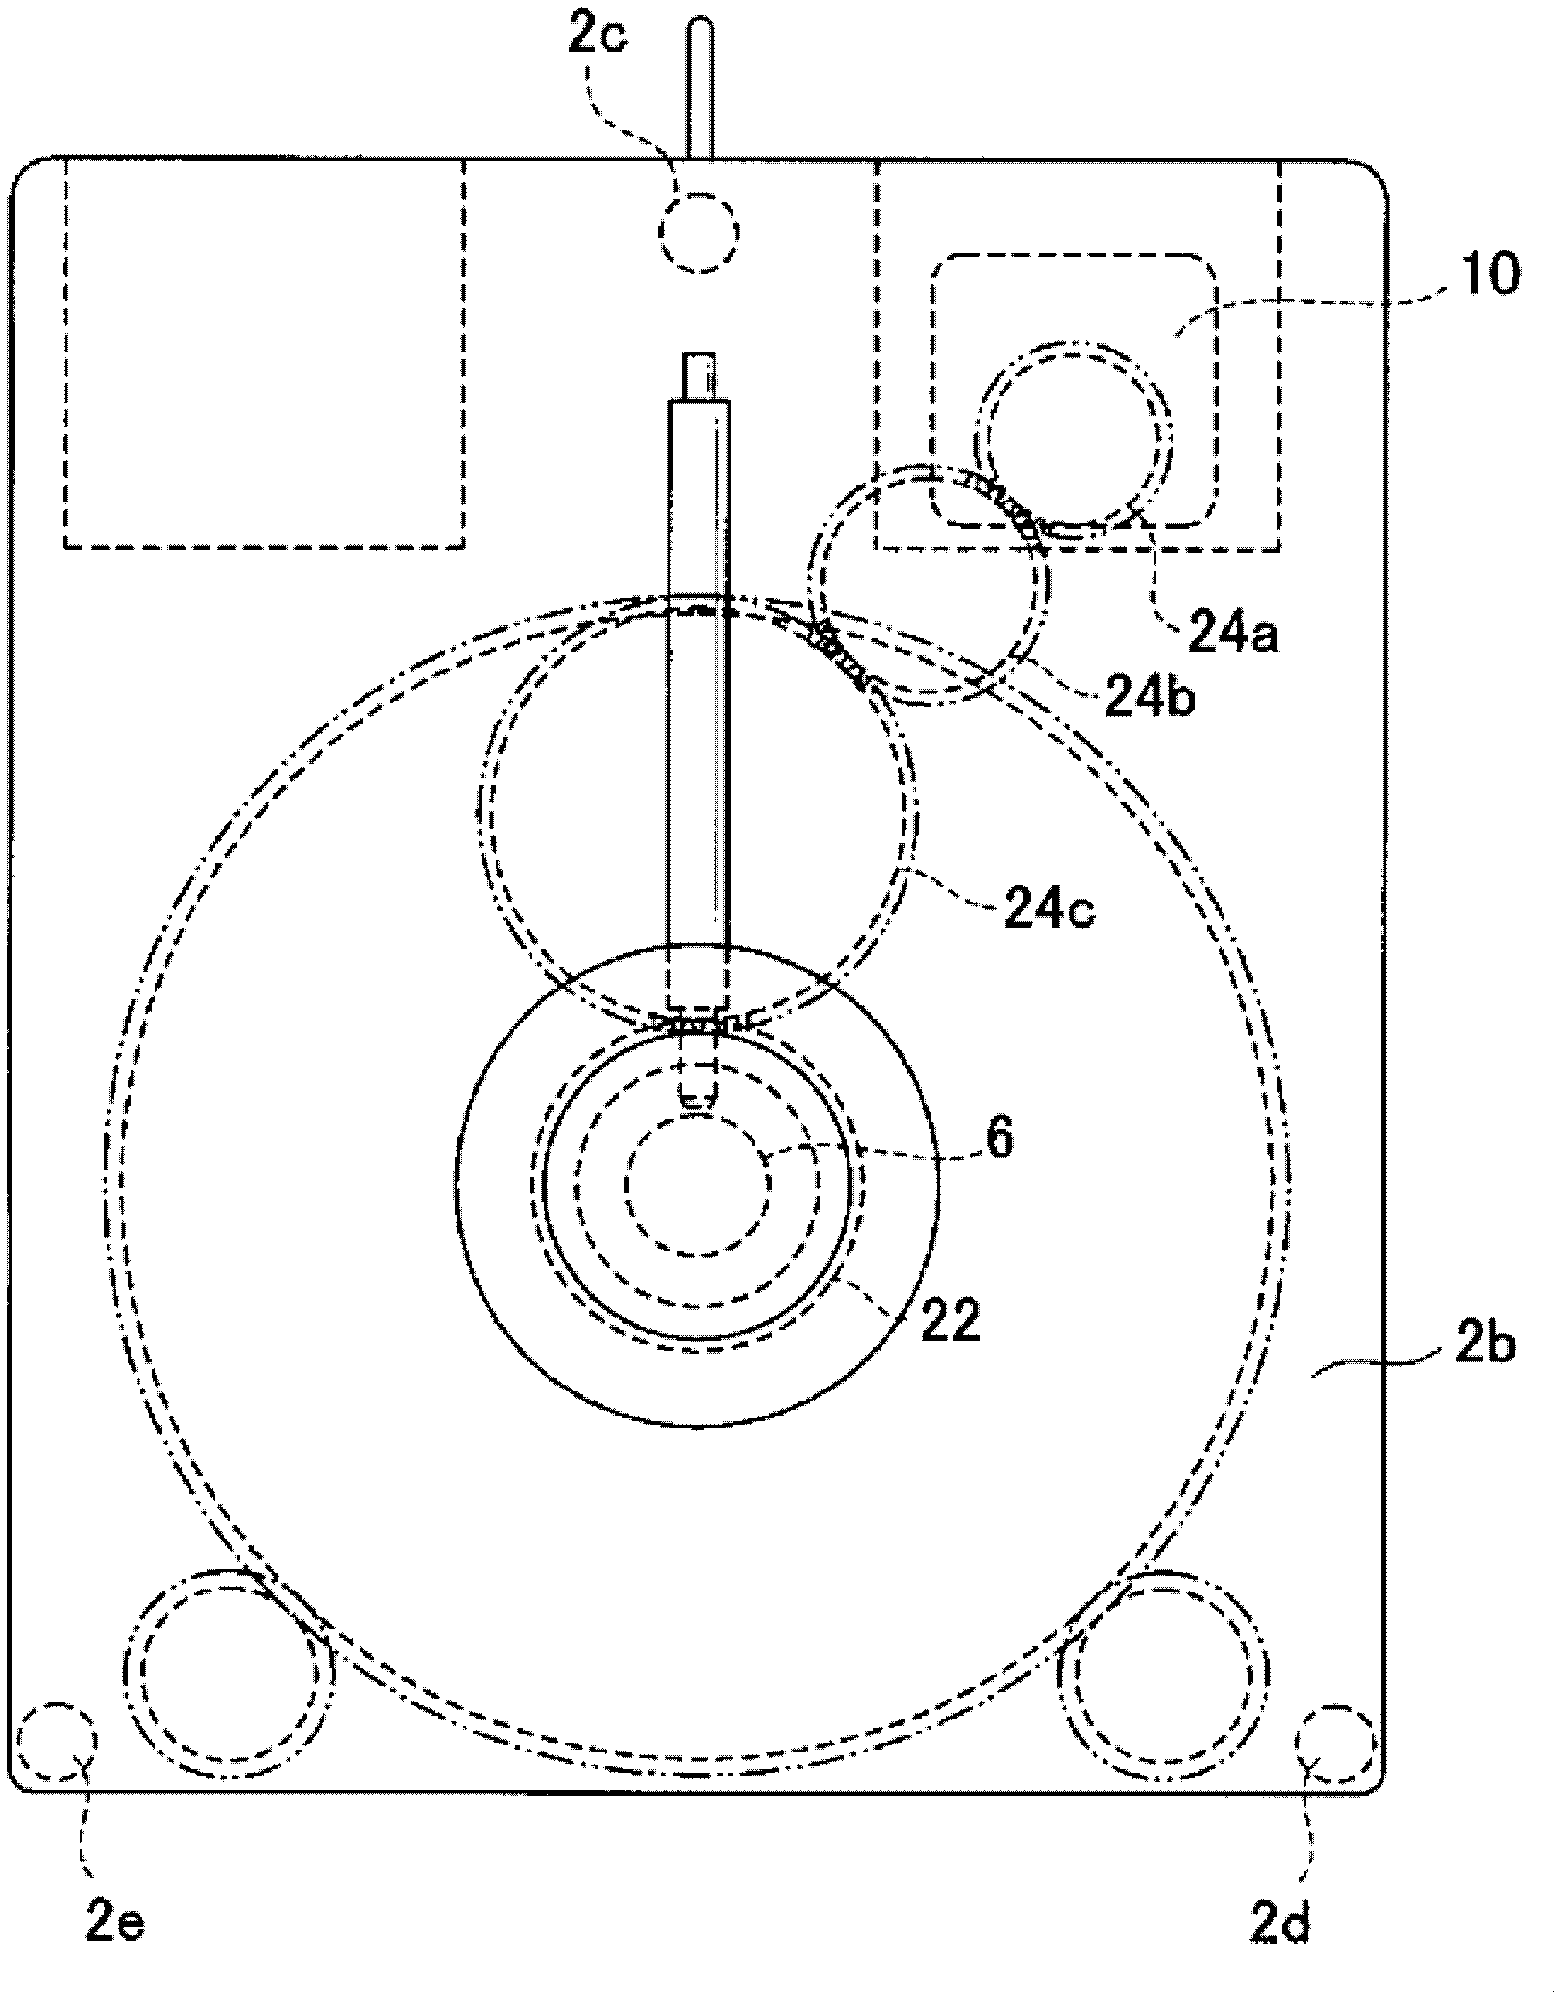 Method of barrel electroplating with aluminum or aluminum alloy